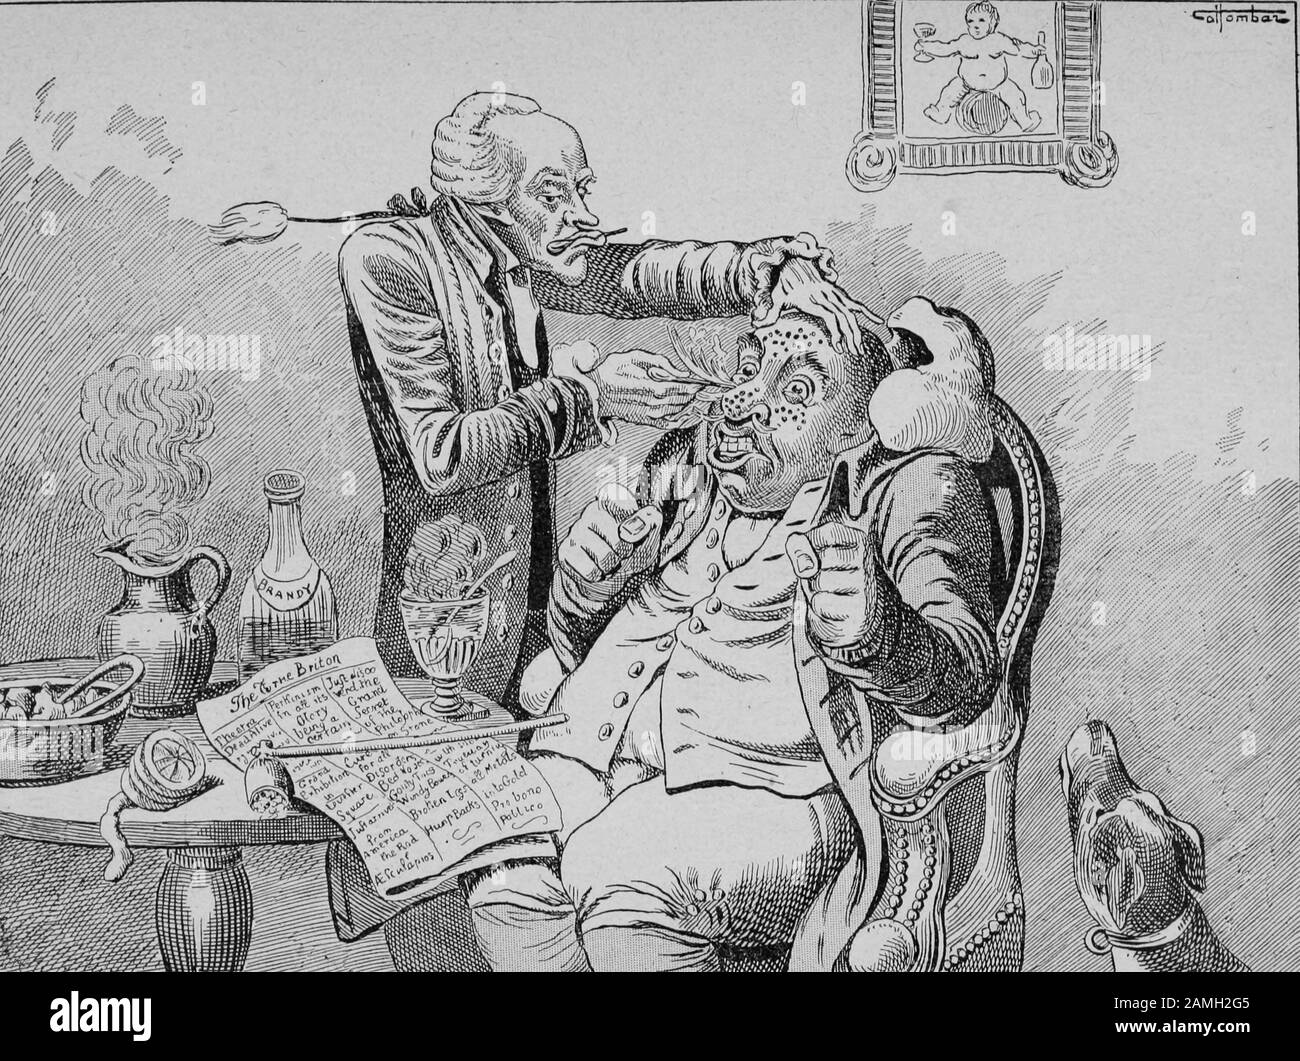 Anti vaccination caricature showing a grotesque doctor vaccinating a patient against smallpox, using a lancet to poke multiple holes in the patient's face, with other quack treatments including a bottle of brandy on a table beside the doctor, suggesting that vaccination is another quack treatment by physicians of the time, United Kingdom, 1907. Courtesy Internet Archive. () Stock Photo